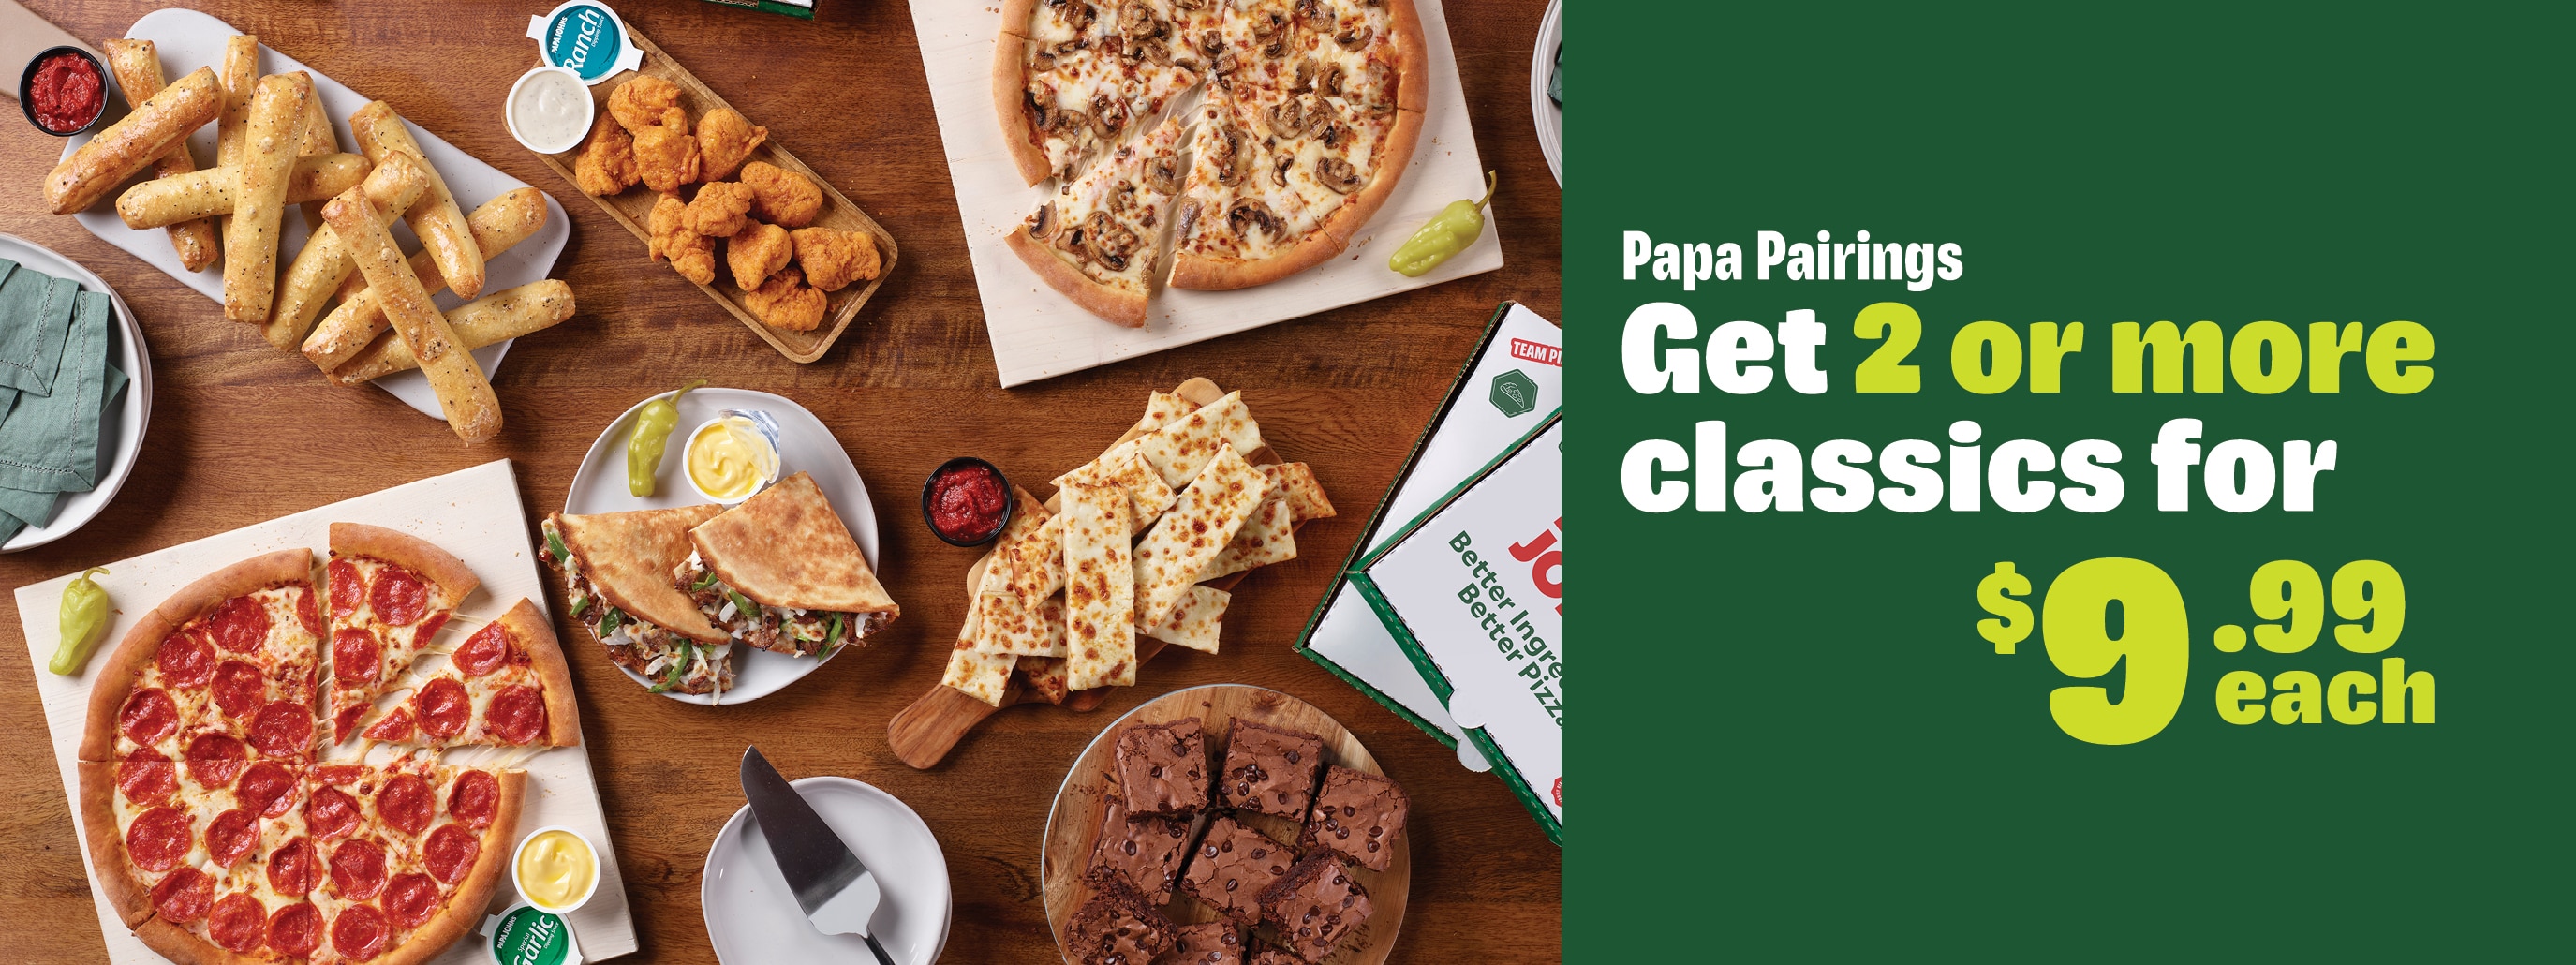 Papa Pairings, get two or more classics for $9.99 each